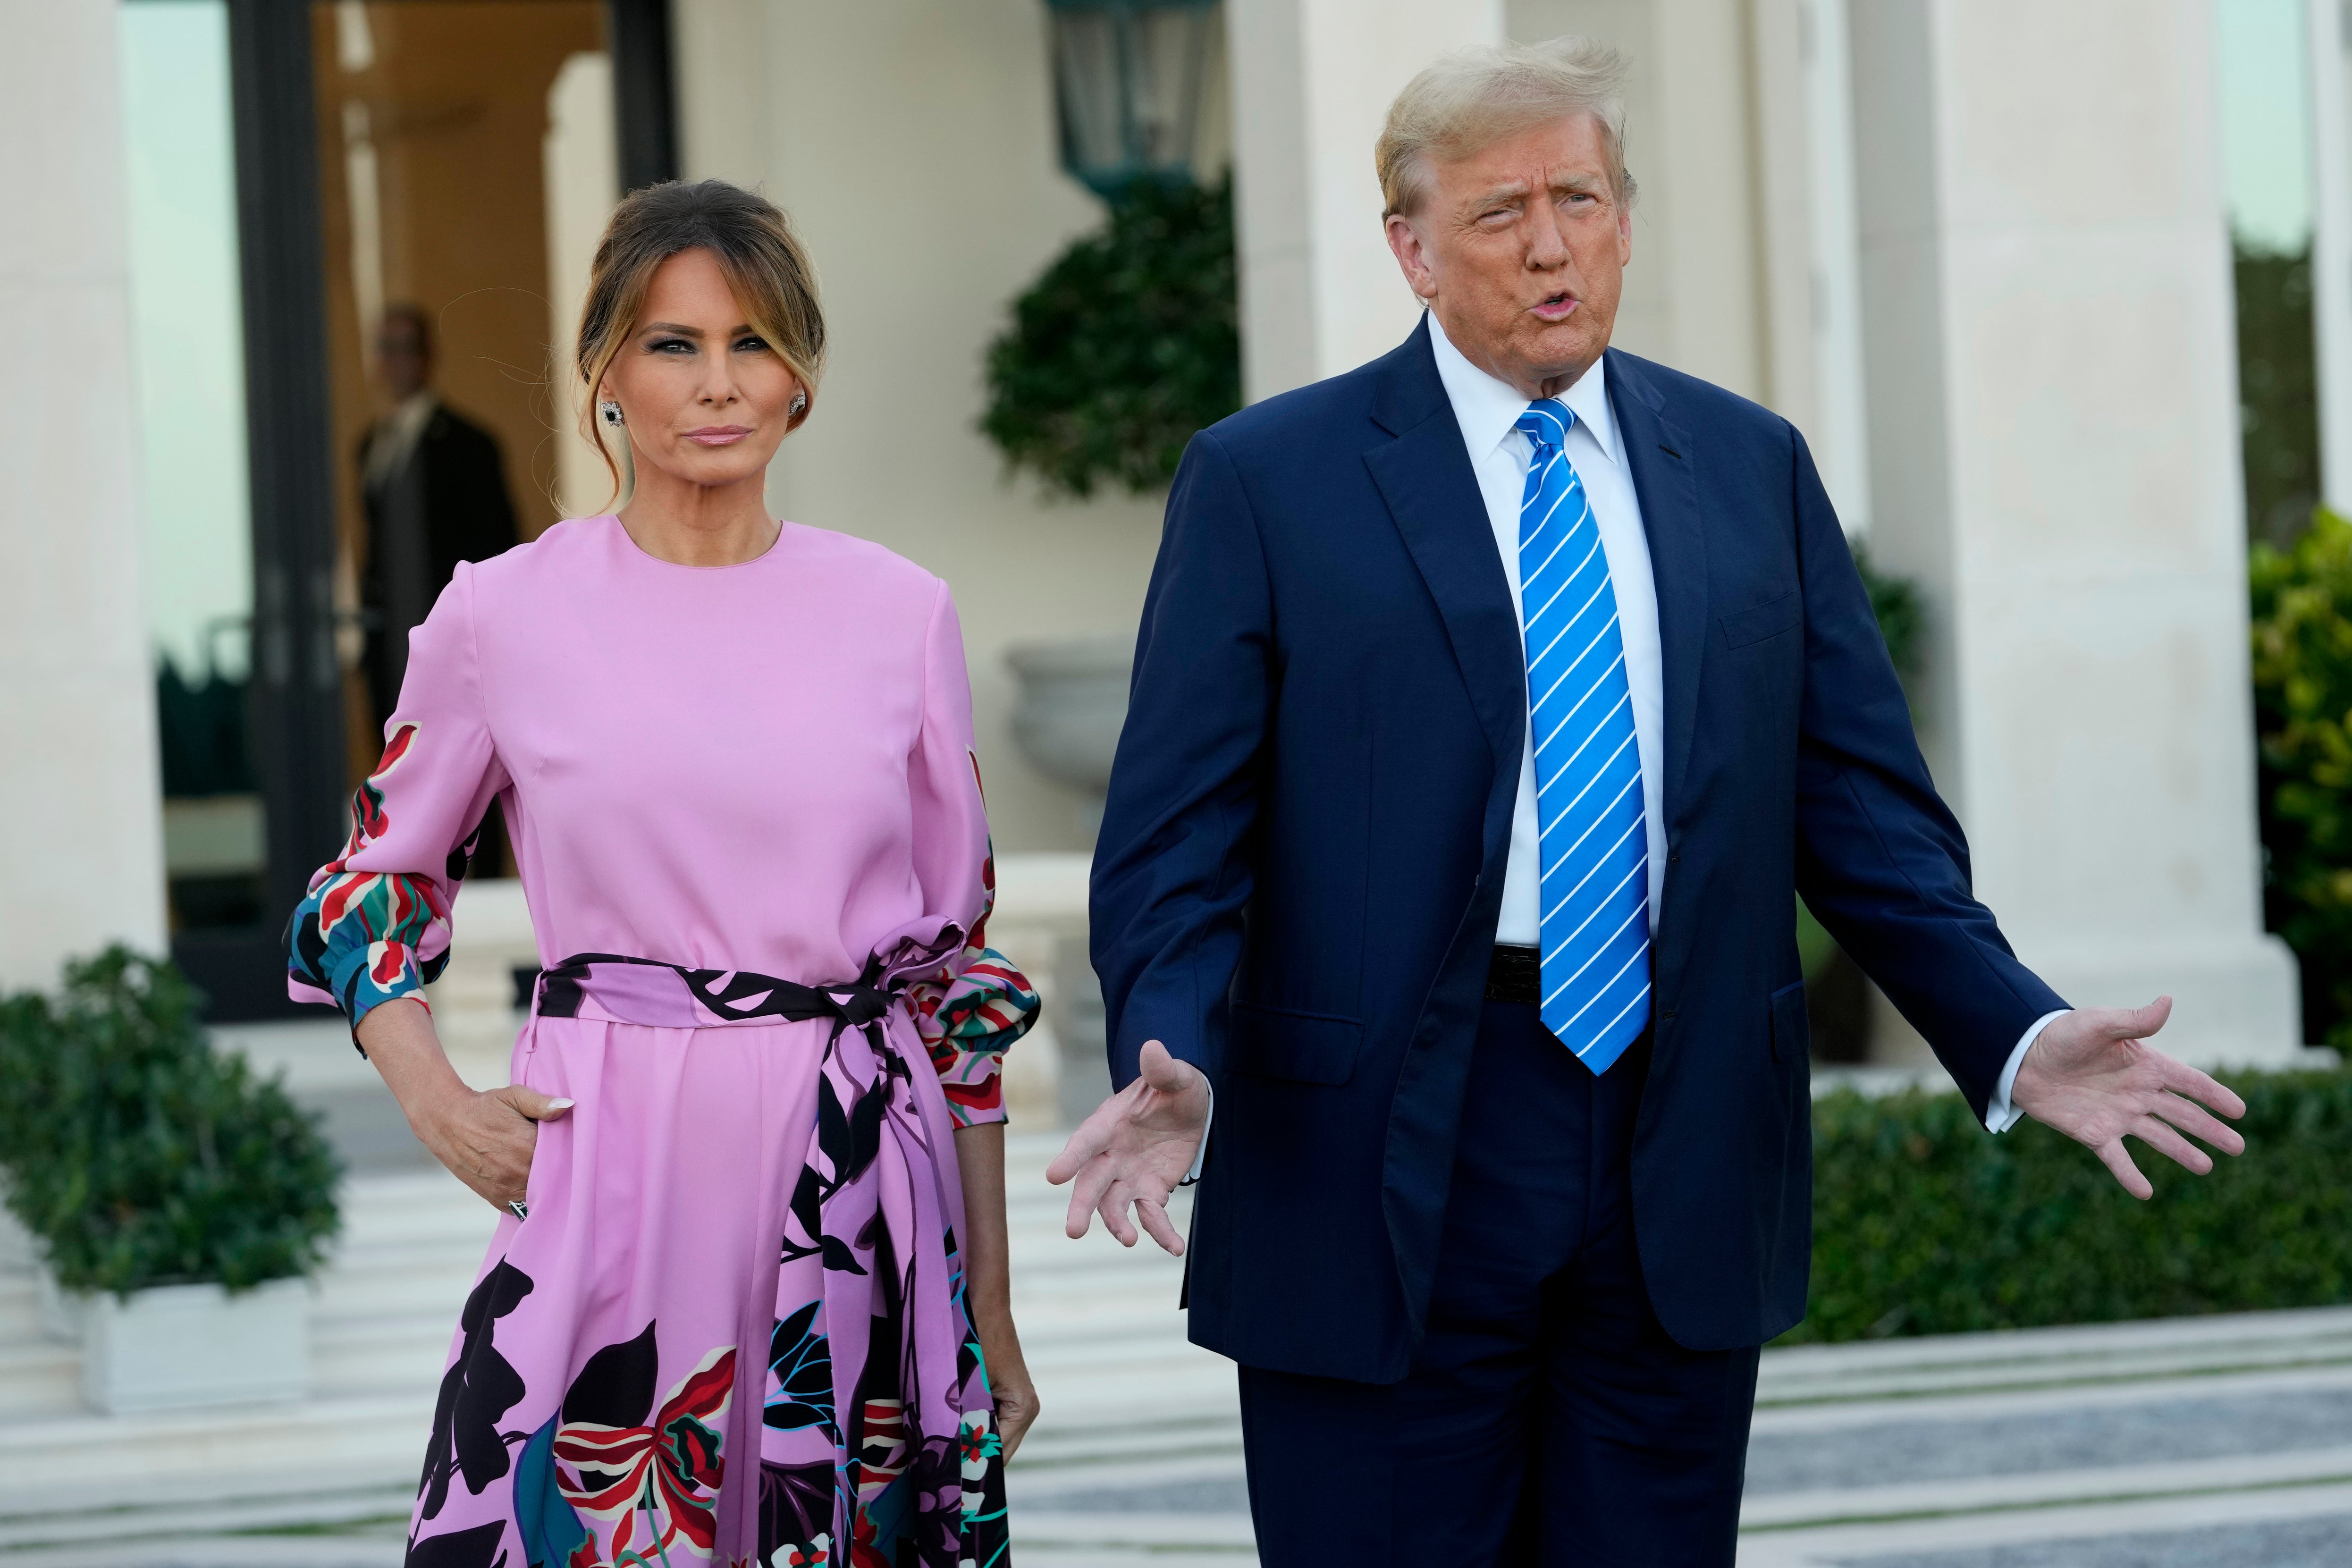 Former President Donald Trump, right, stands with his wife, Melania Trump